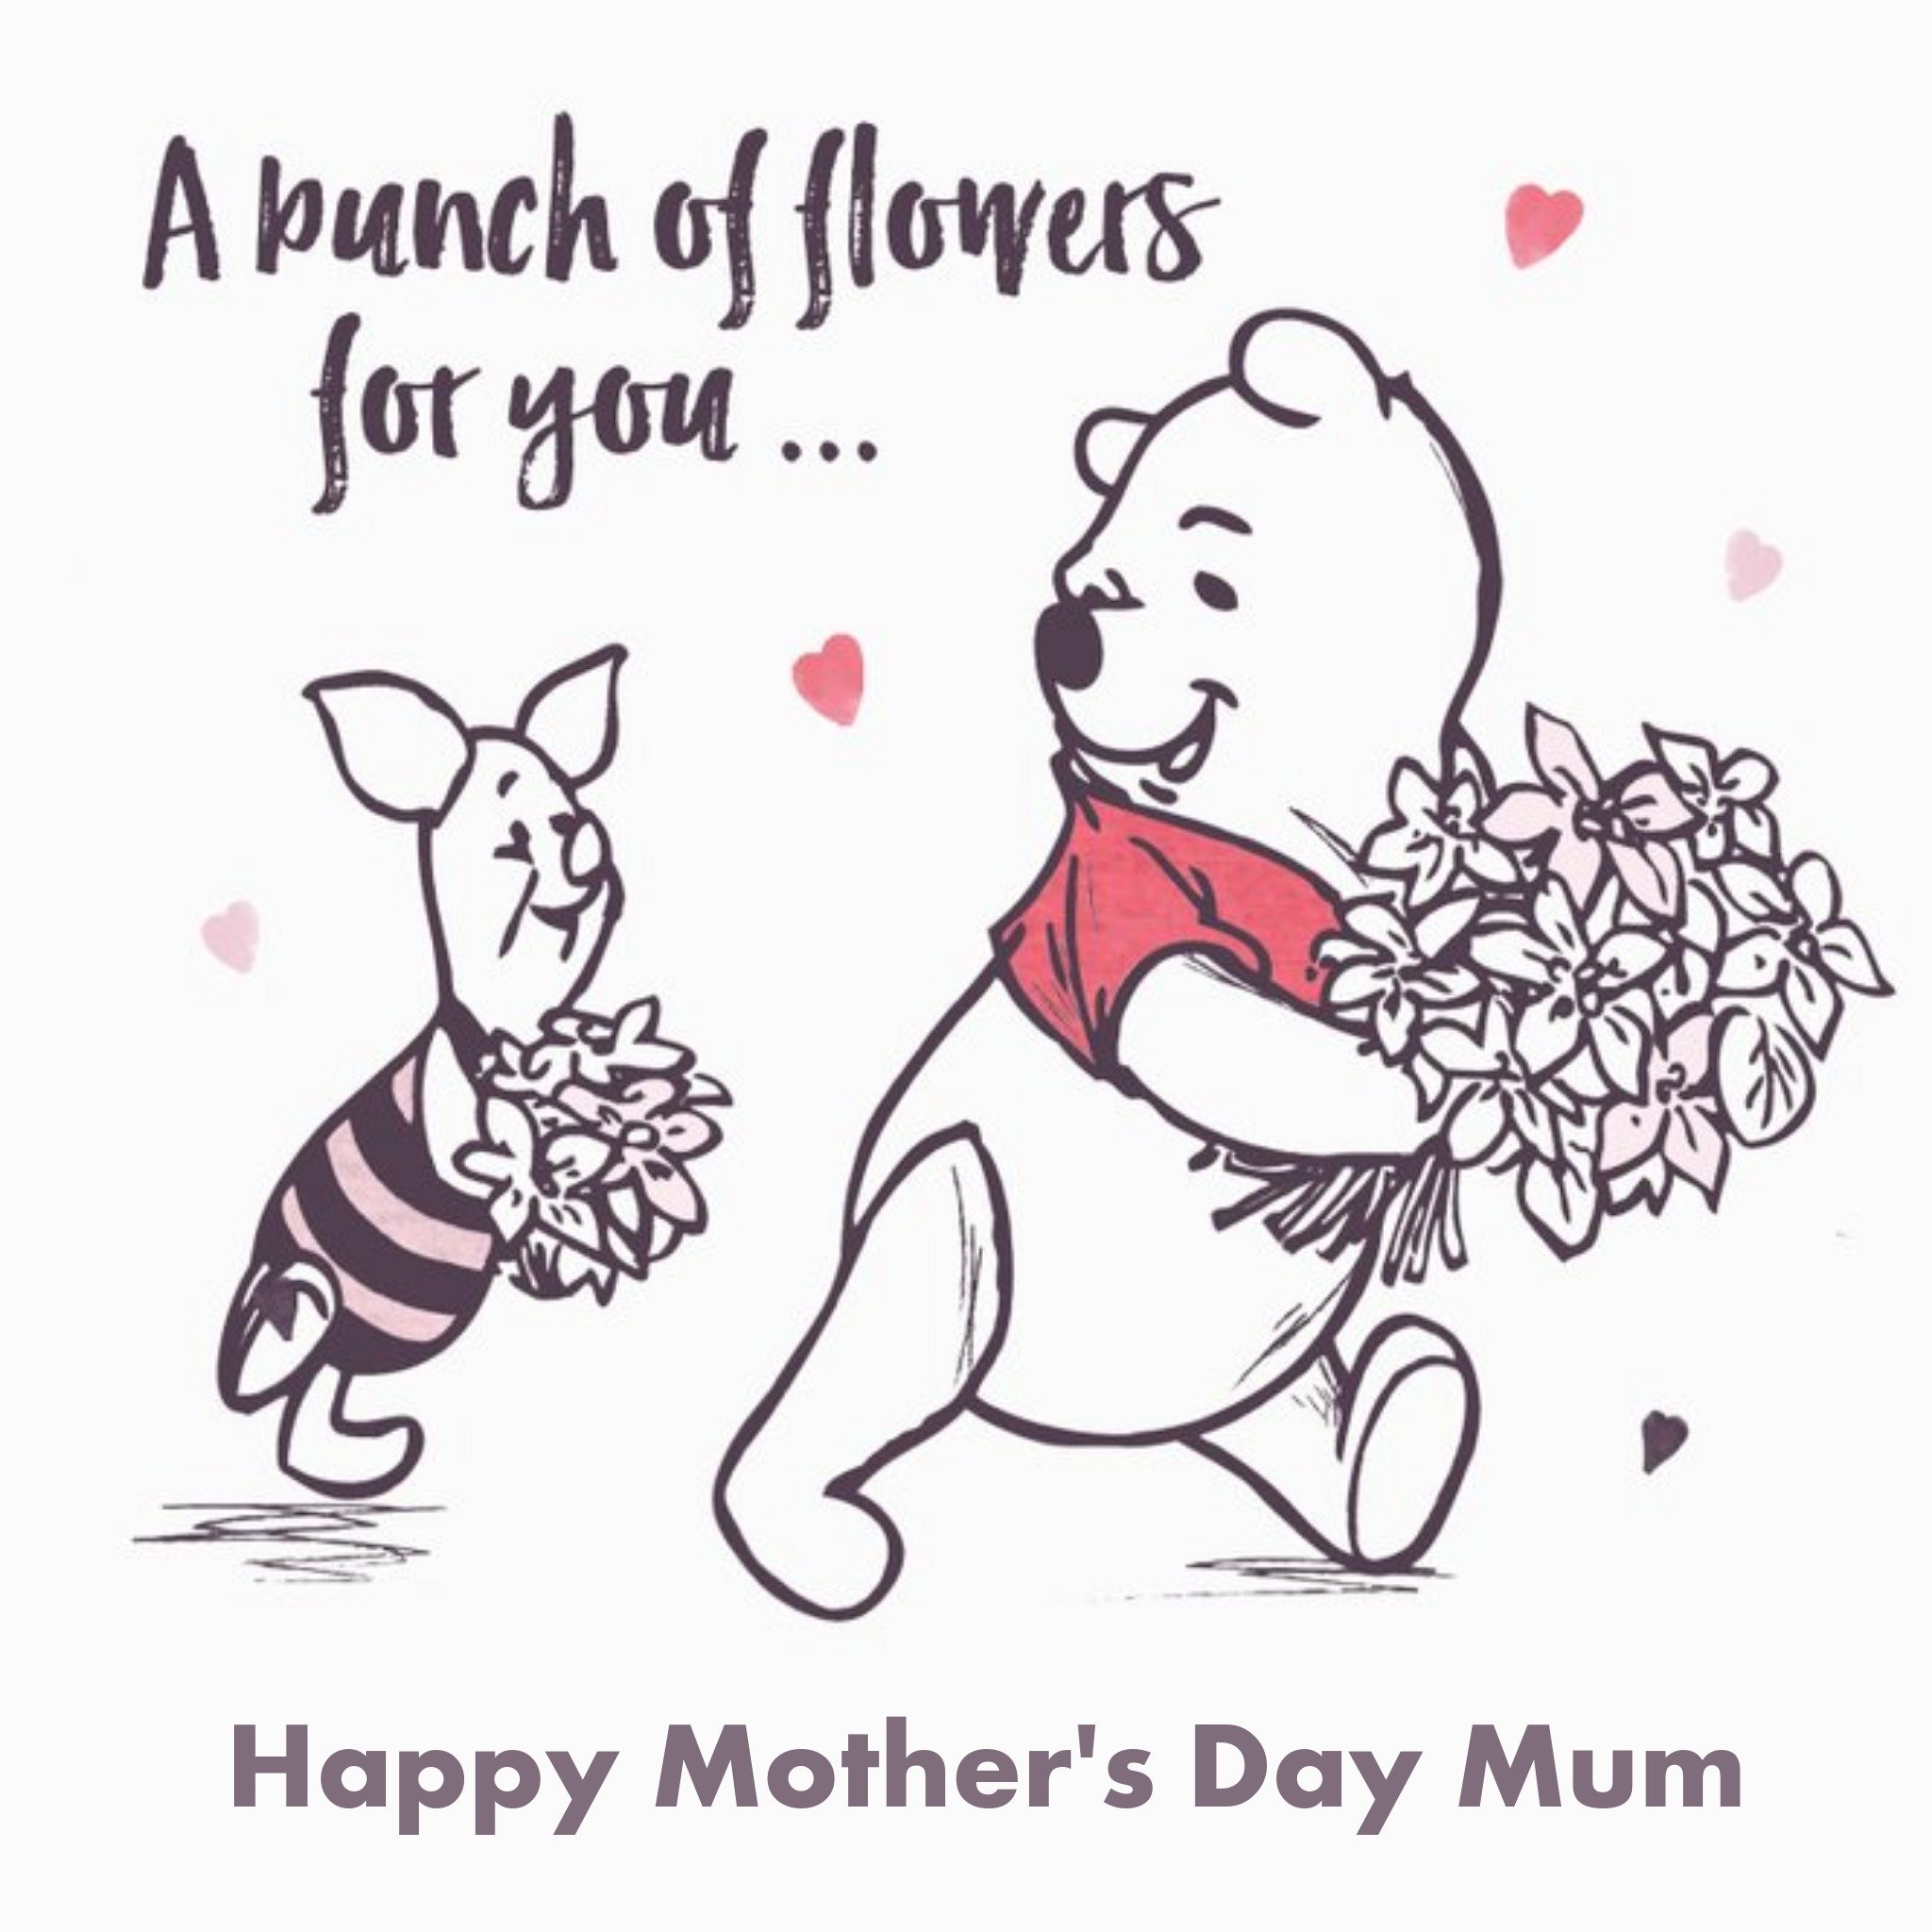 Disney Winnie The Pooh And A Bunch Of Flowers For You Card, Large